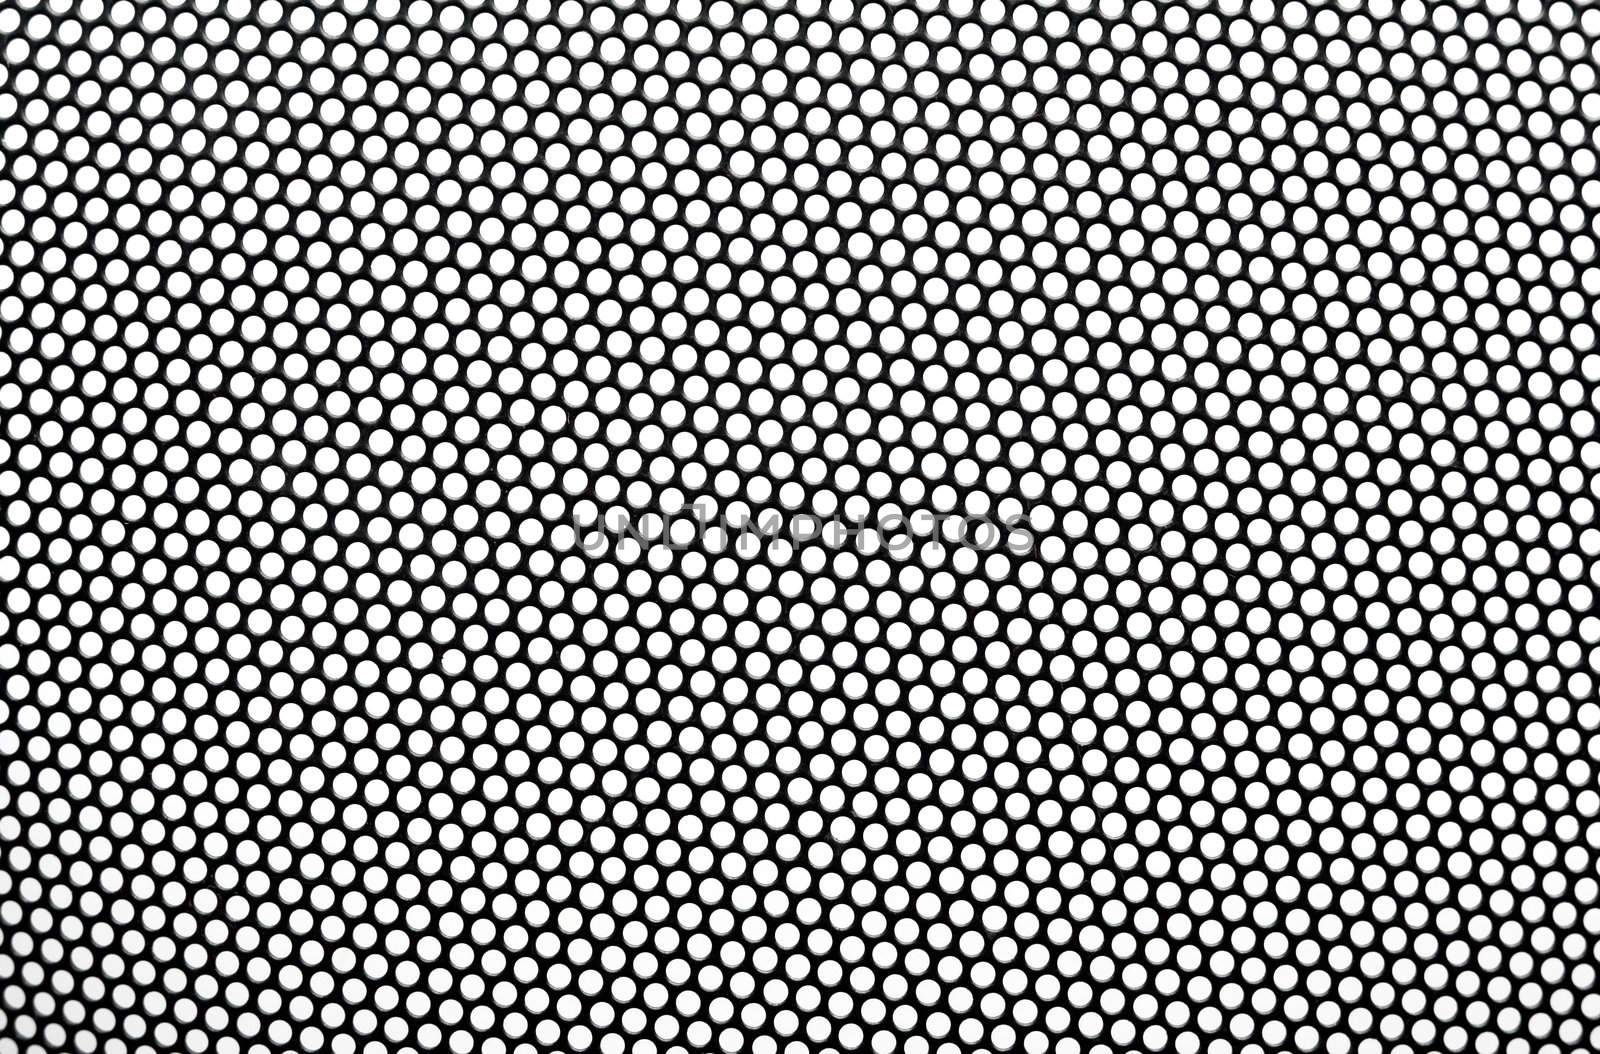 Black metal lattice with round apertures on white background. Close-up.